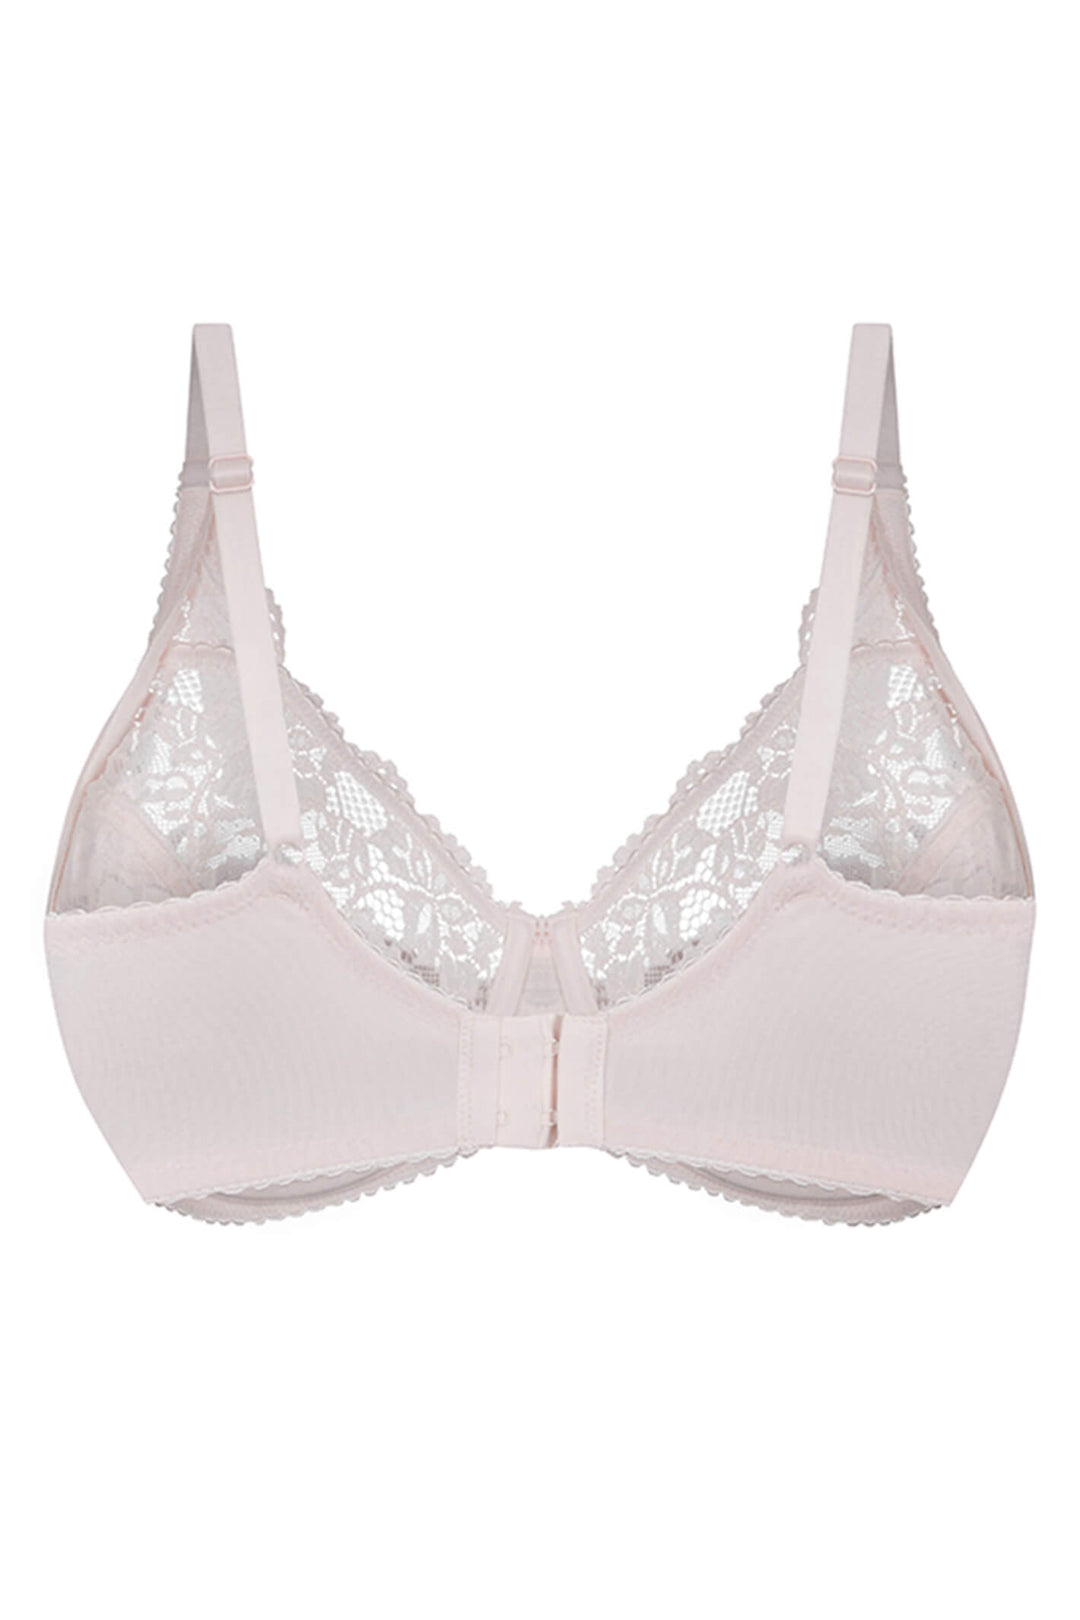 Charnos Rosalind Full Cup Underwired Bra - White